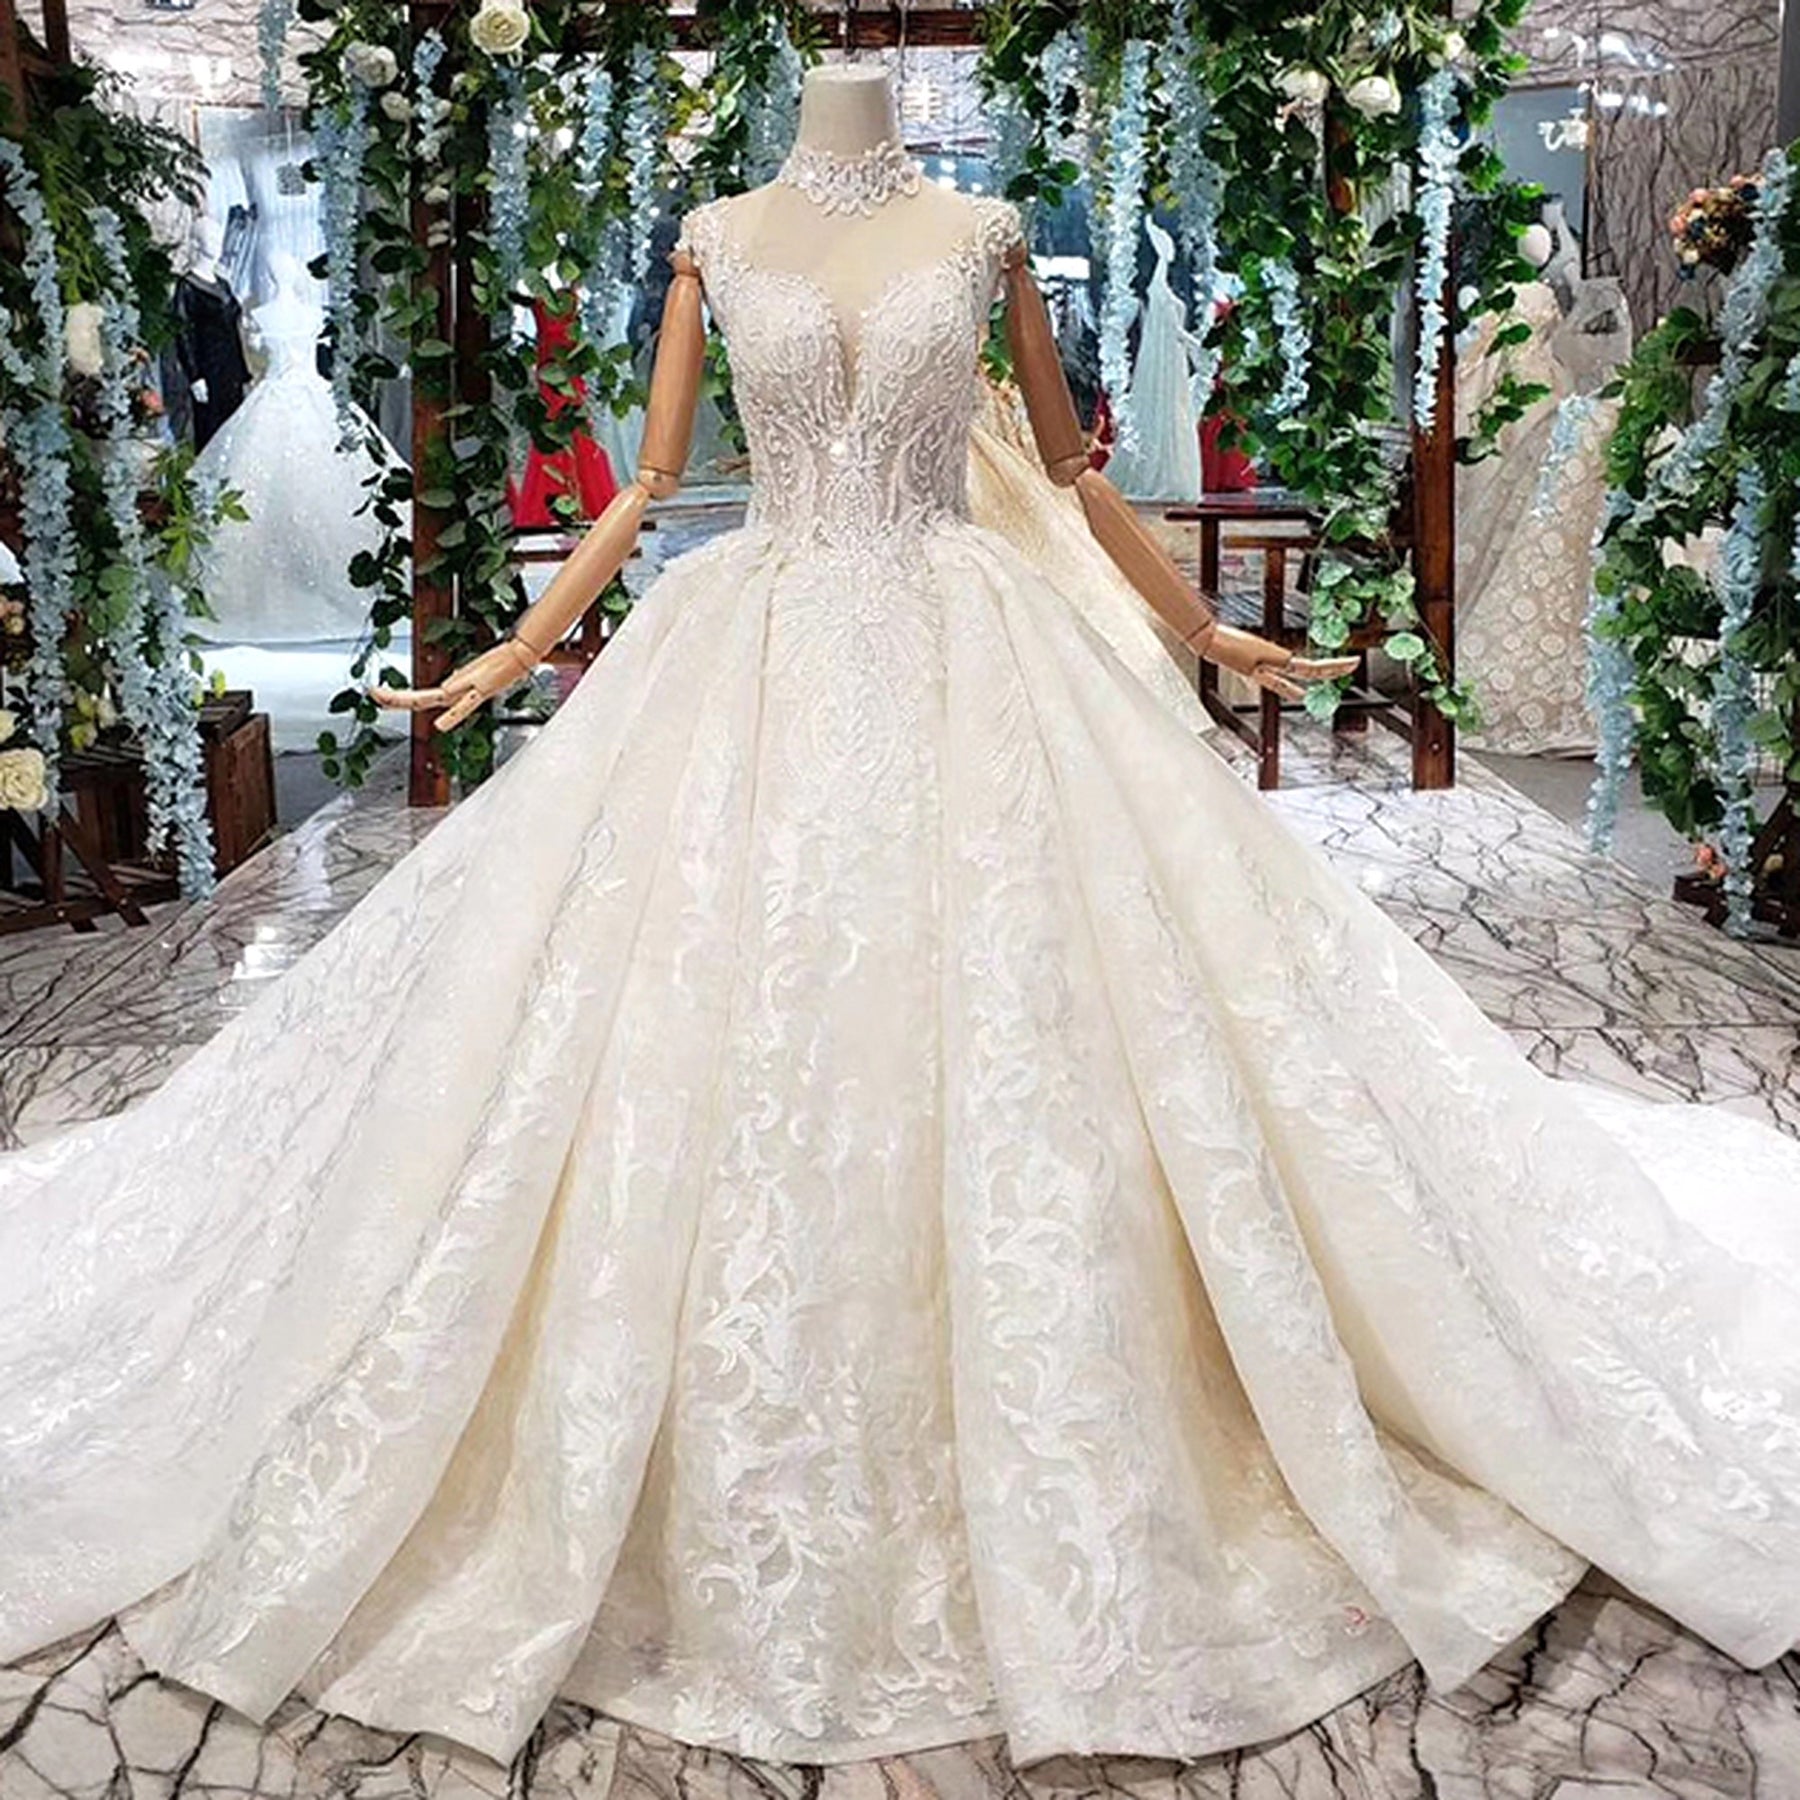 2021 New Western Strapless Hot Bridal Dress Lace Wedding Dress Bride Gowns  Trailing Vestido De Noiva - China Wedding Dress and Trailing Dress price |  Made-in-China.com